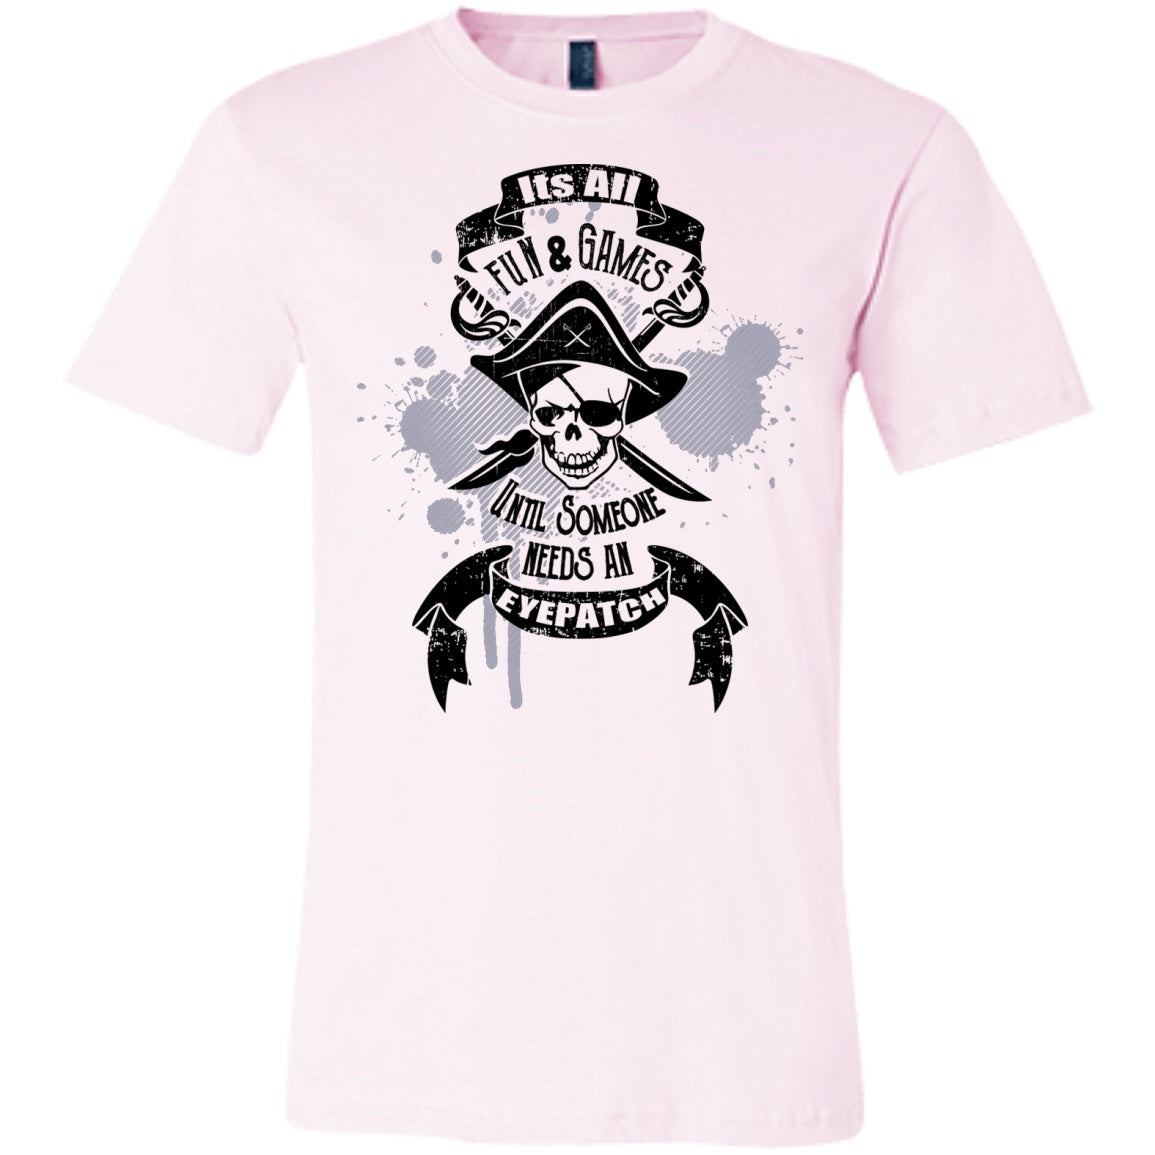 It's All Fun And Games Until Someone Needs An Eyepatch - Unisex and Women's Shirts - GoneBold.gift